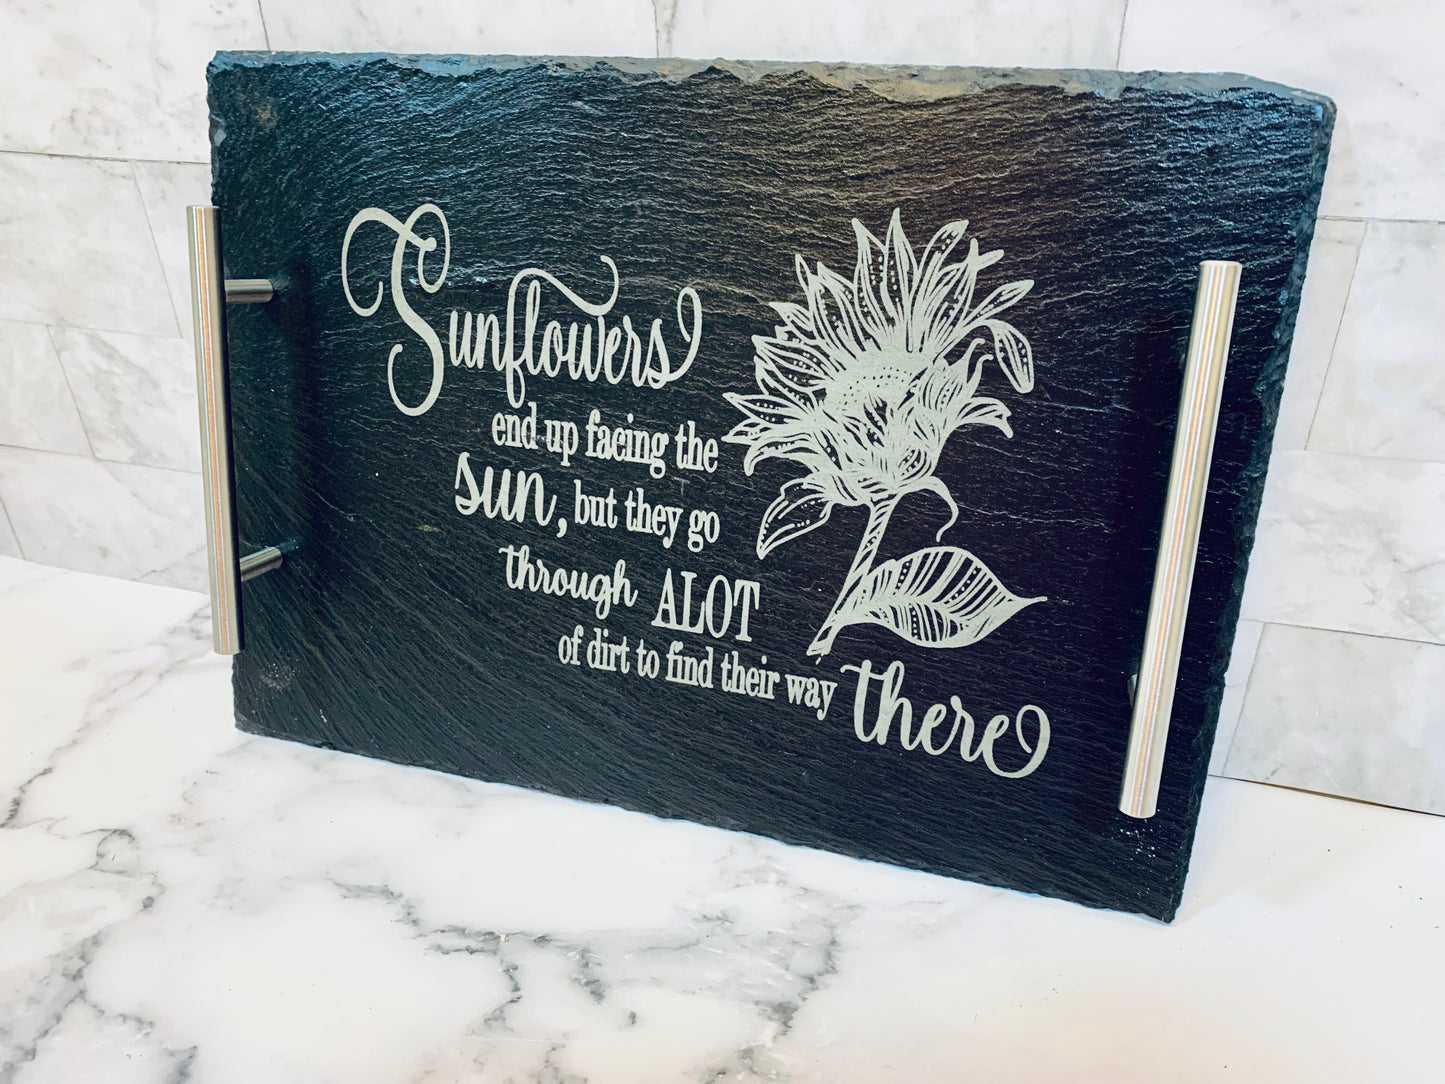 Sunflowers Ending Up Facing The Sun, But They Go Through A Lot Of Dirt To Find Their Way There Sunflower Slate Tray - MixMatched Creations